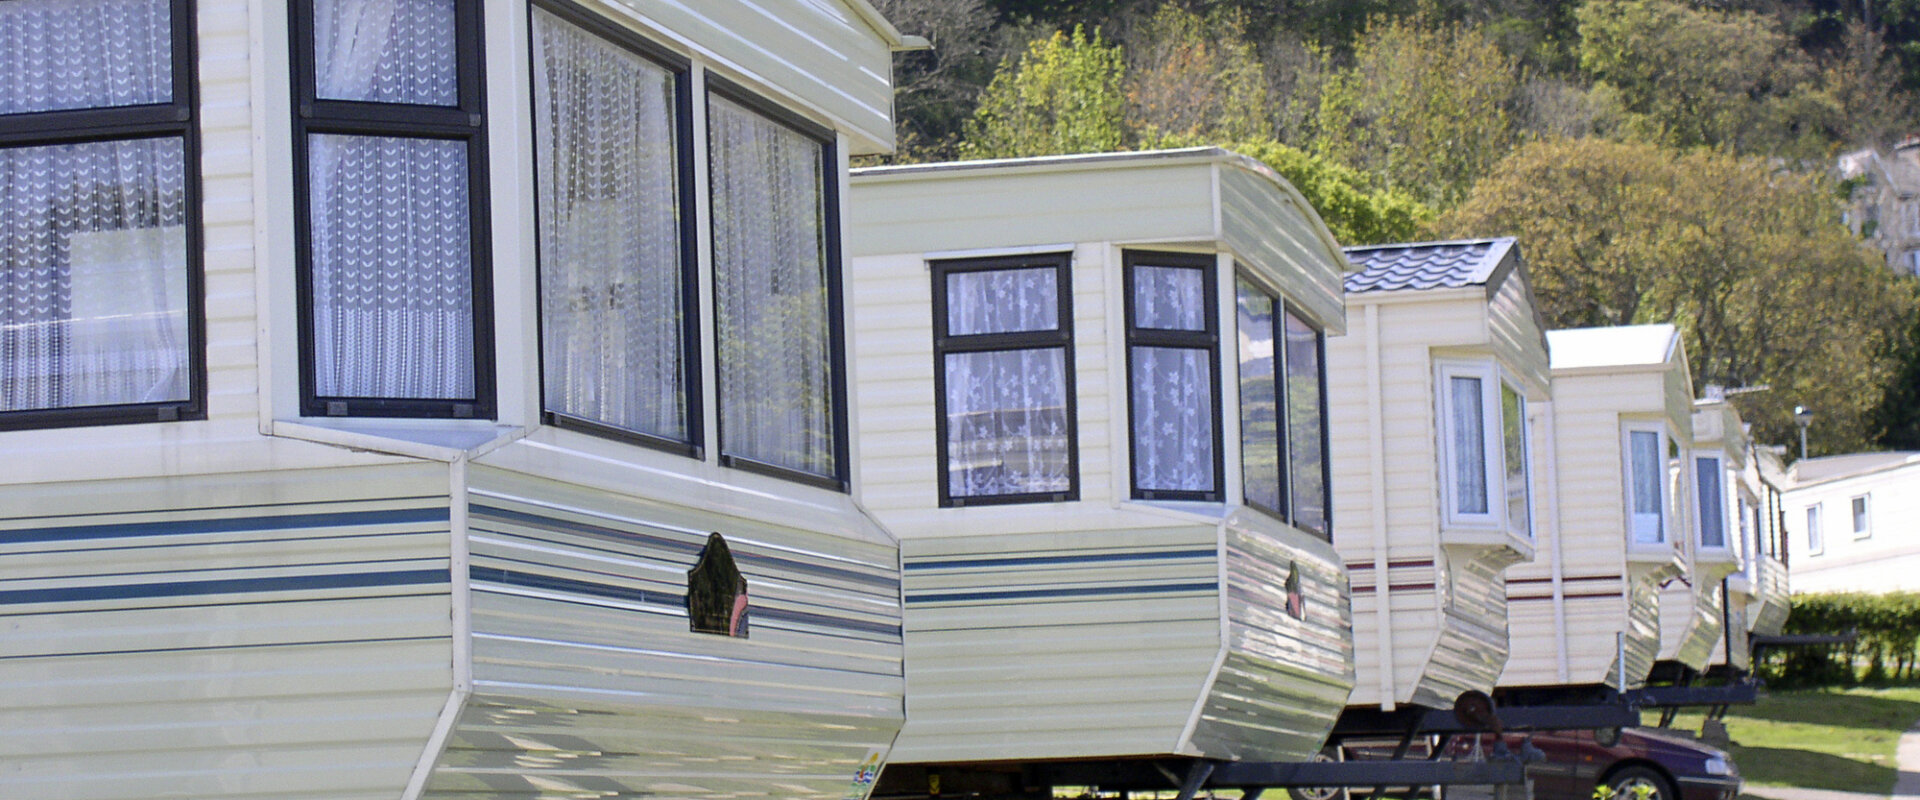 We Buy Mobile Homes in Ladson, SC for Cash!